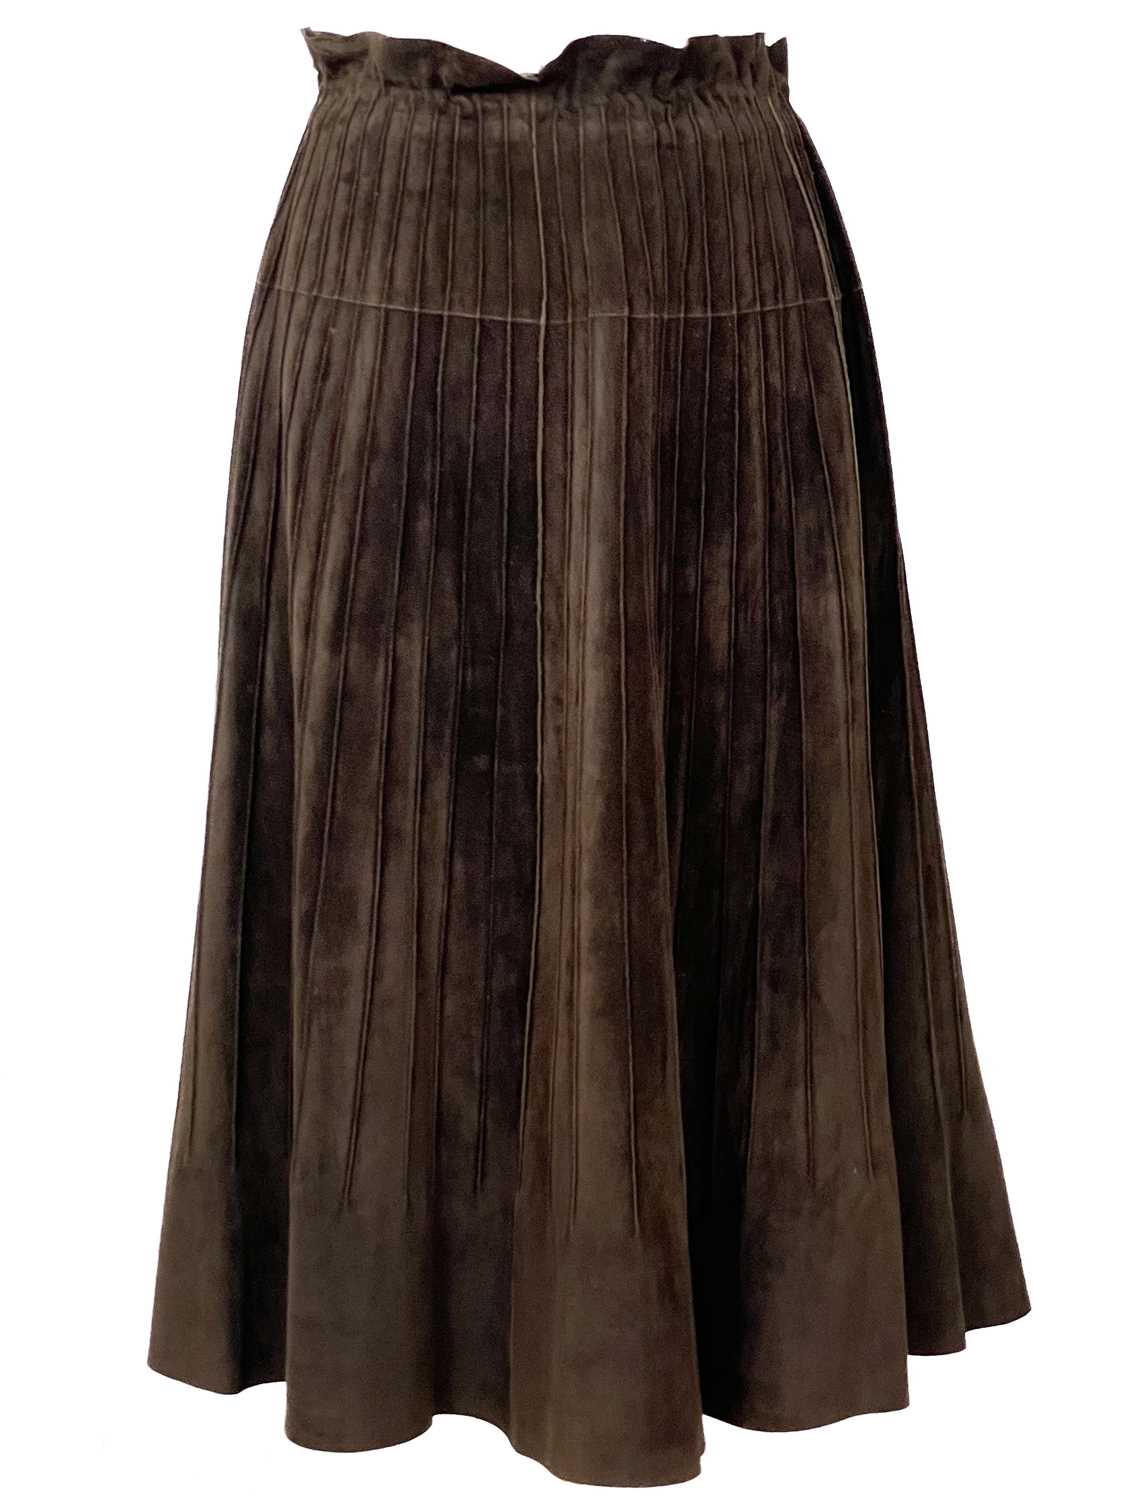 A Beltrami brown suede leather fitted jacket and skirt set. - Image 3 of 5